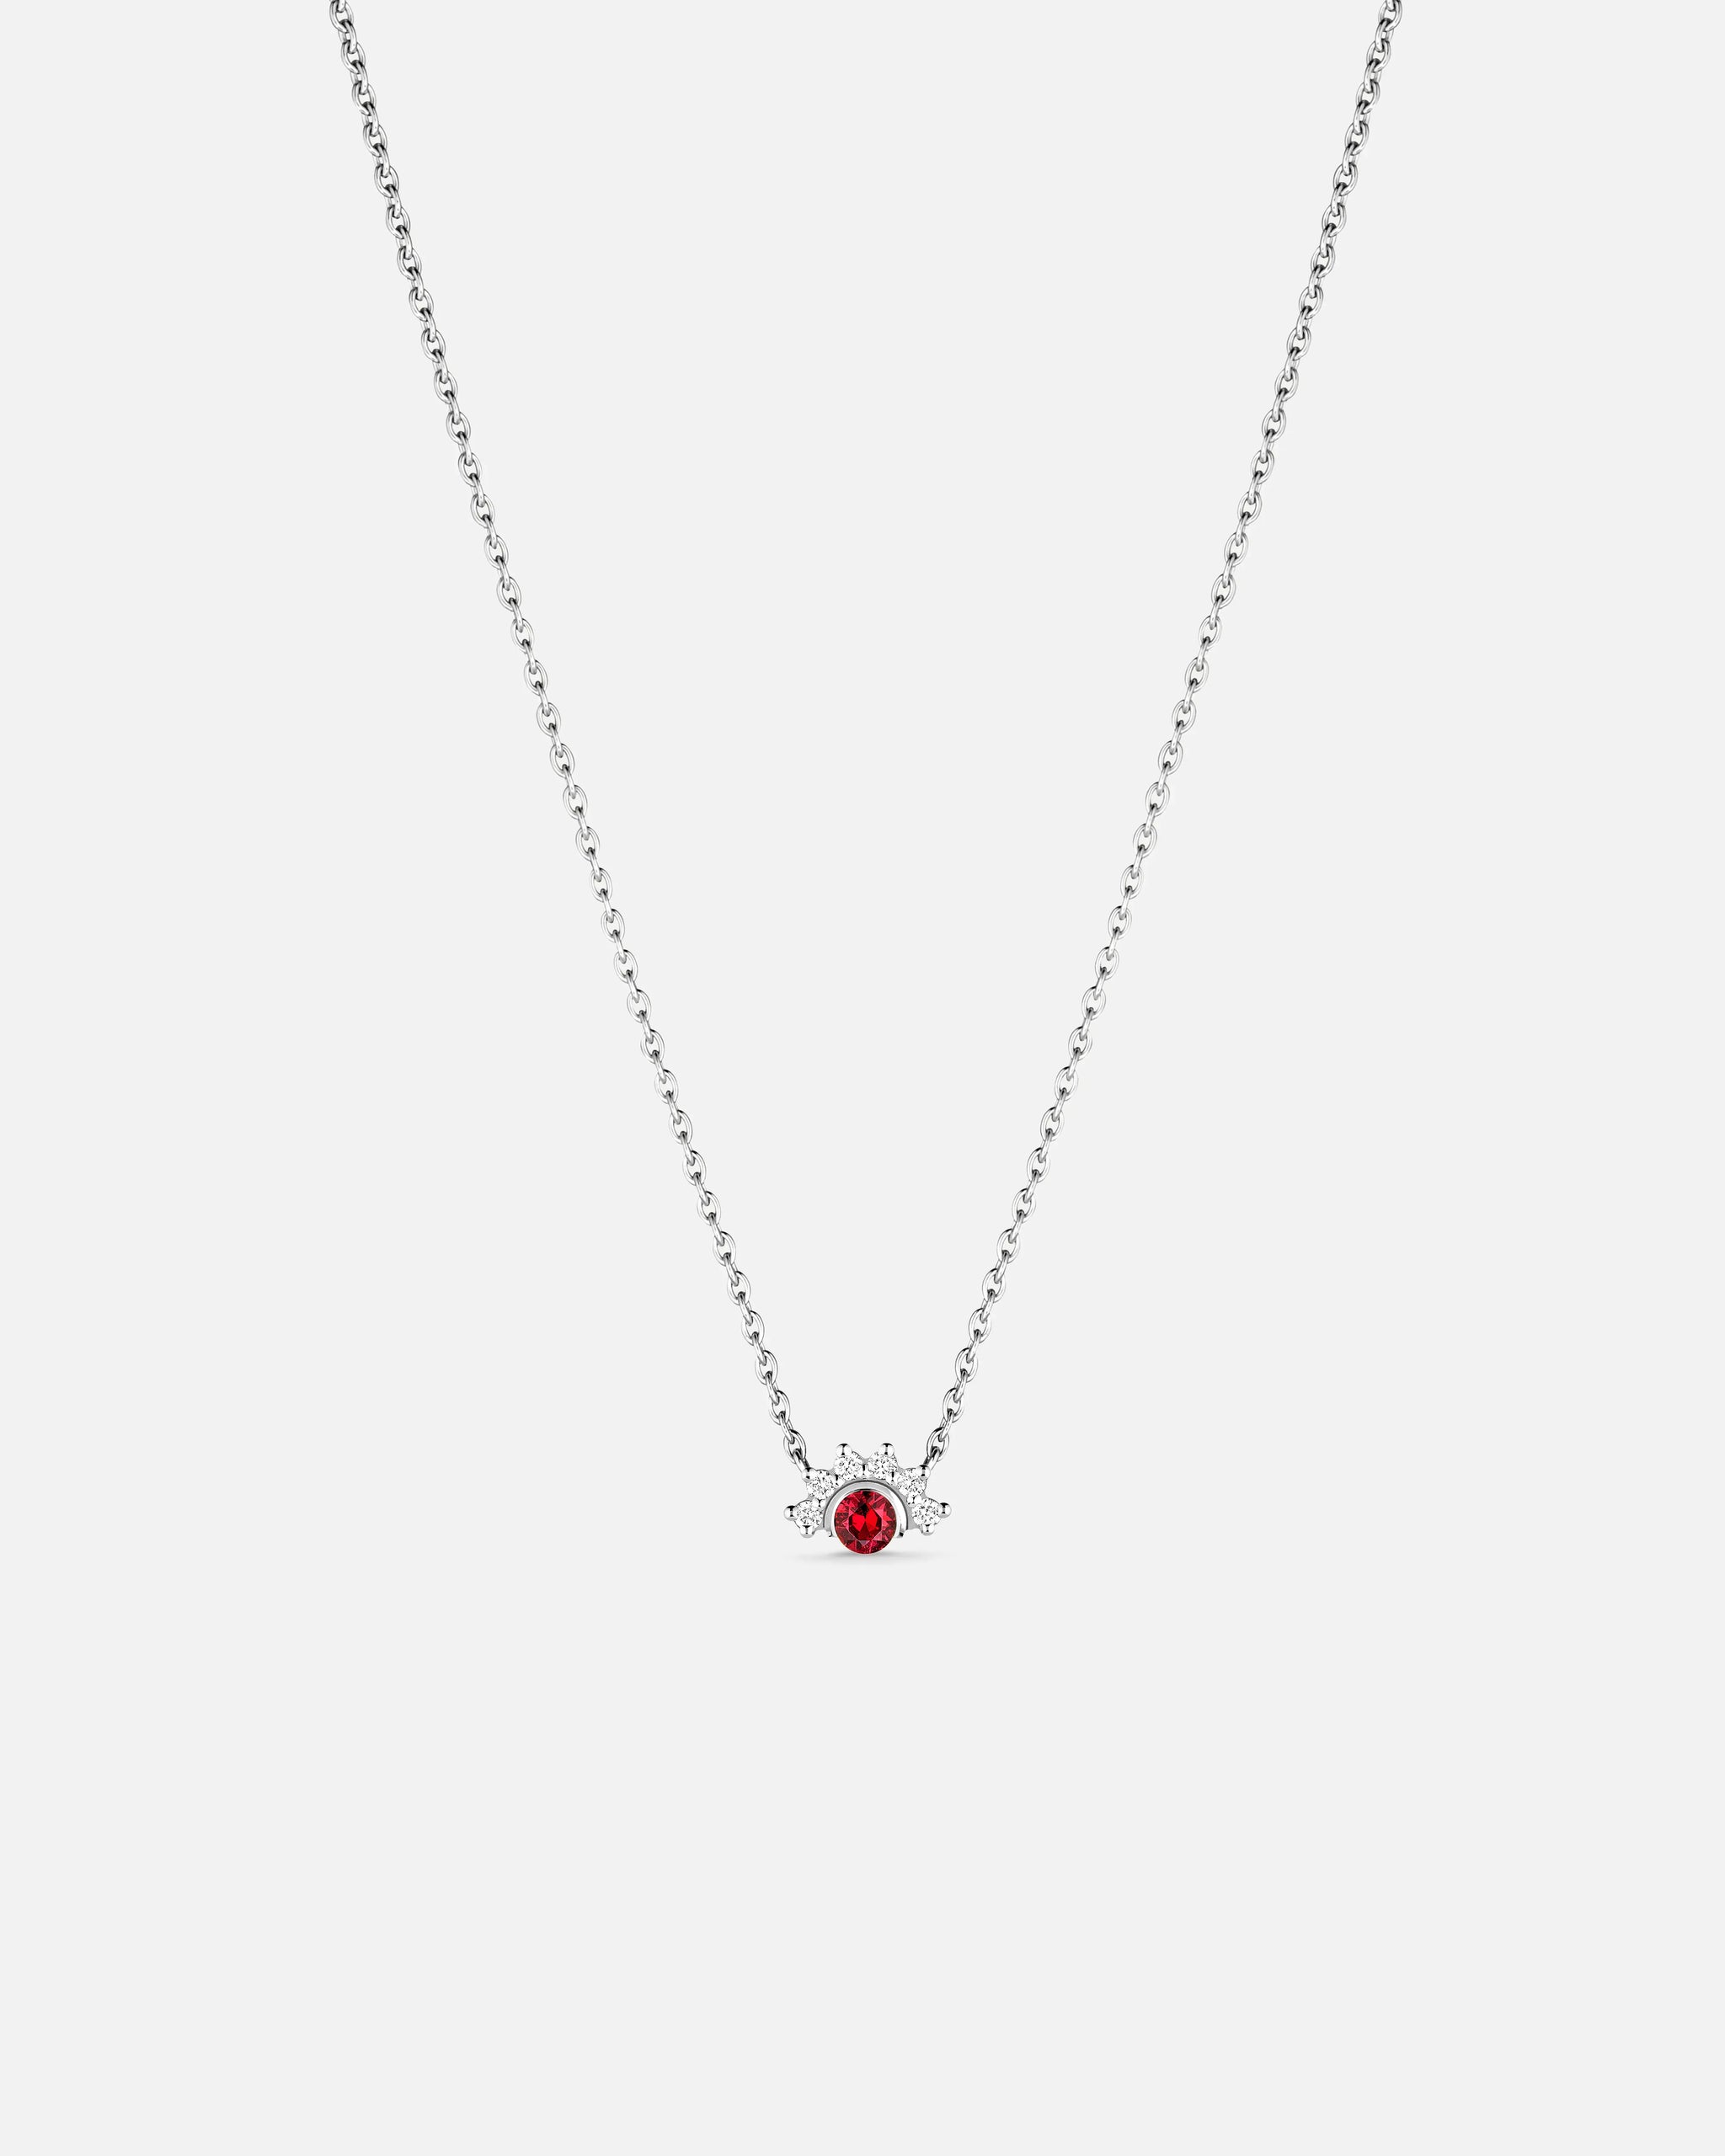 Red Spinel Pendant in White Gold - 1 - Nouvel Heritage